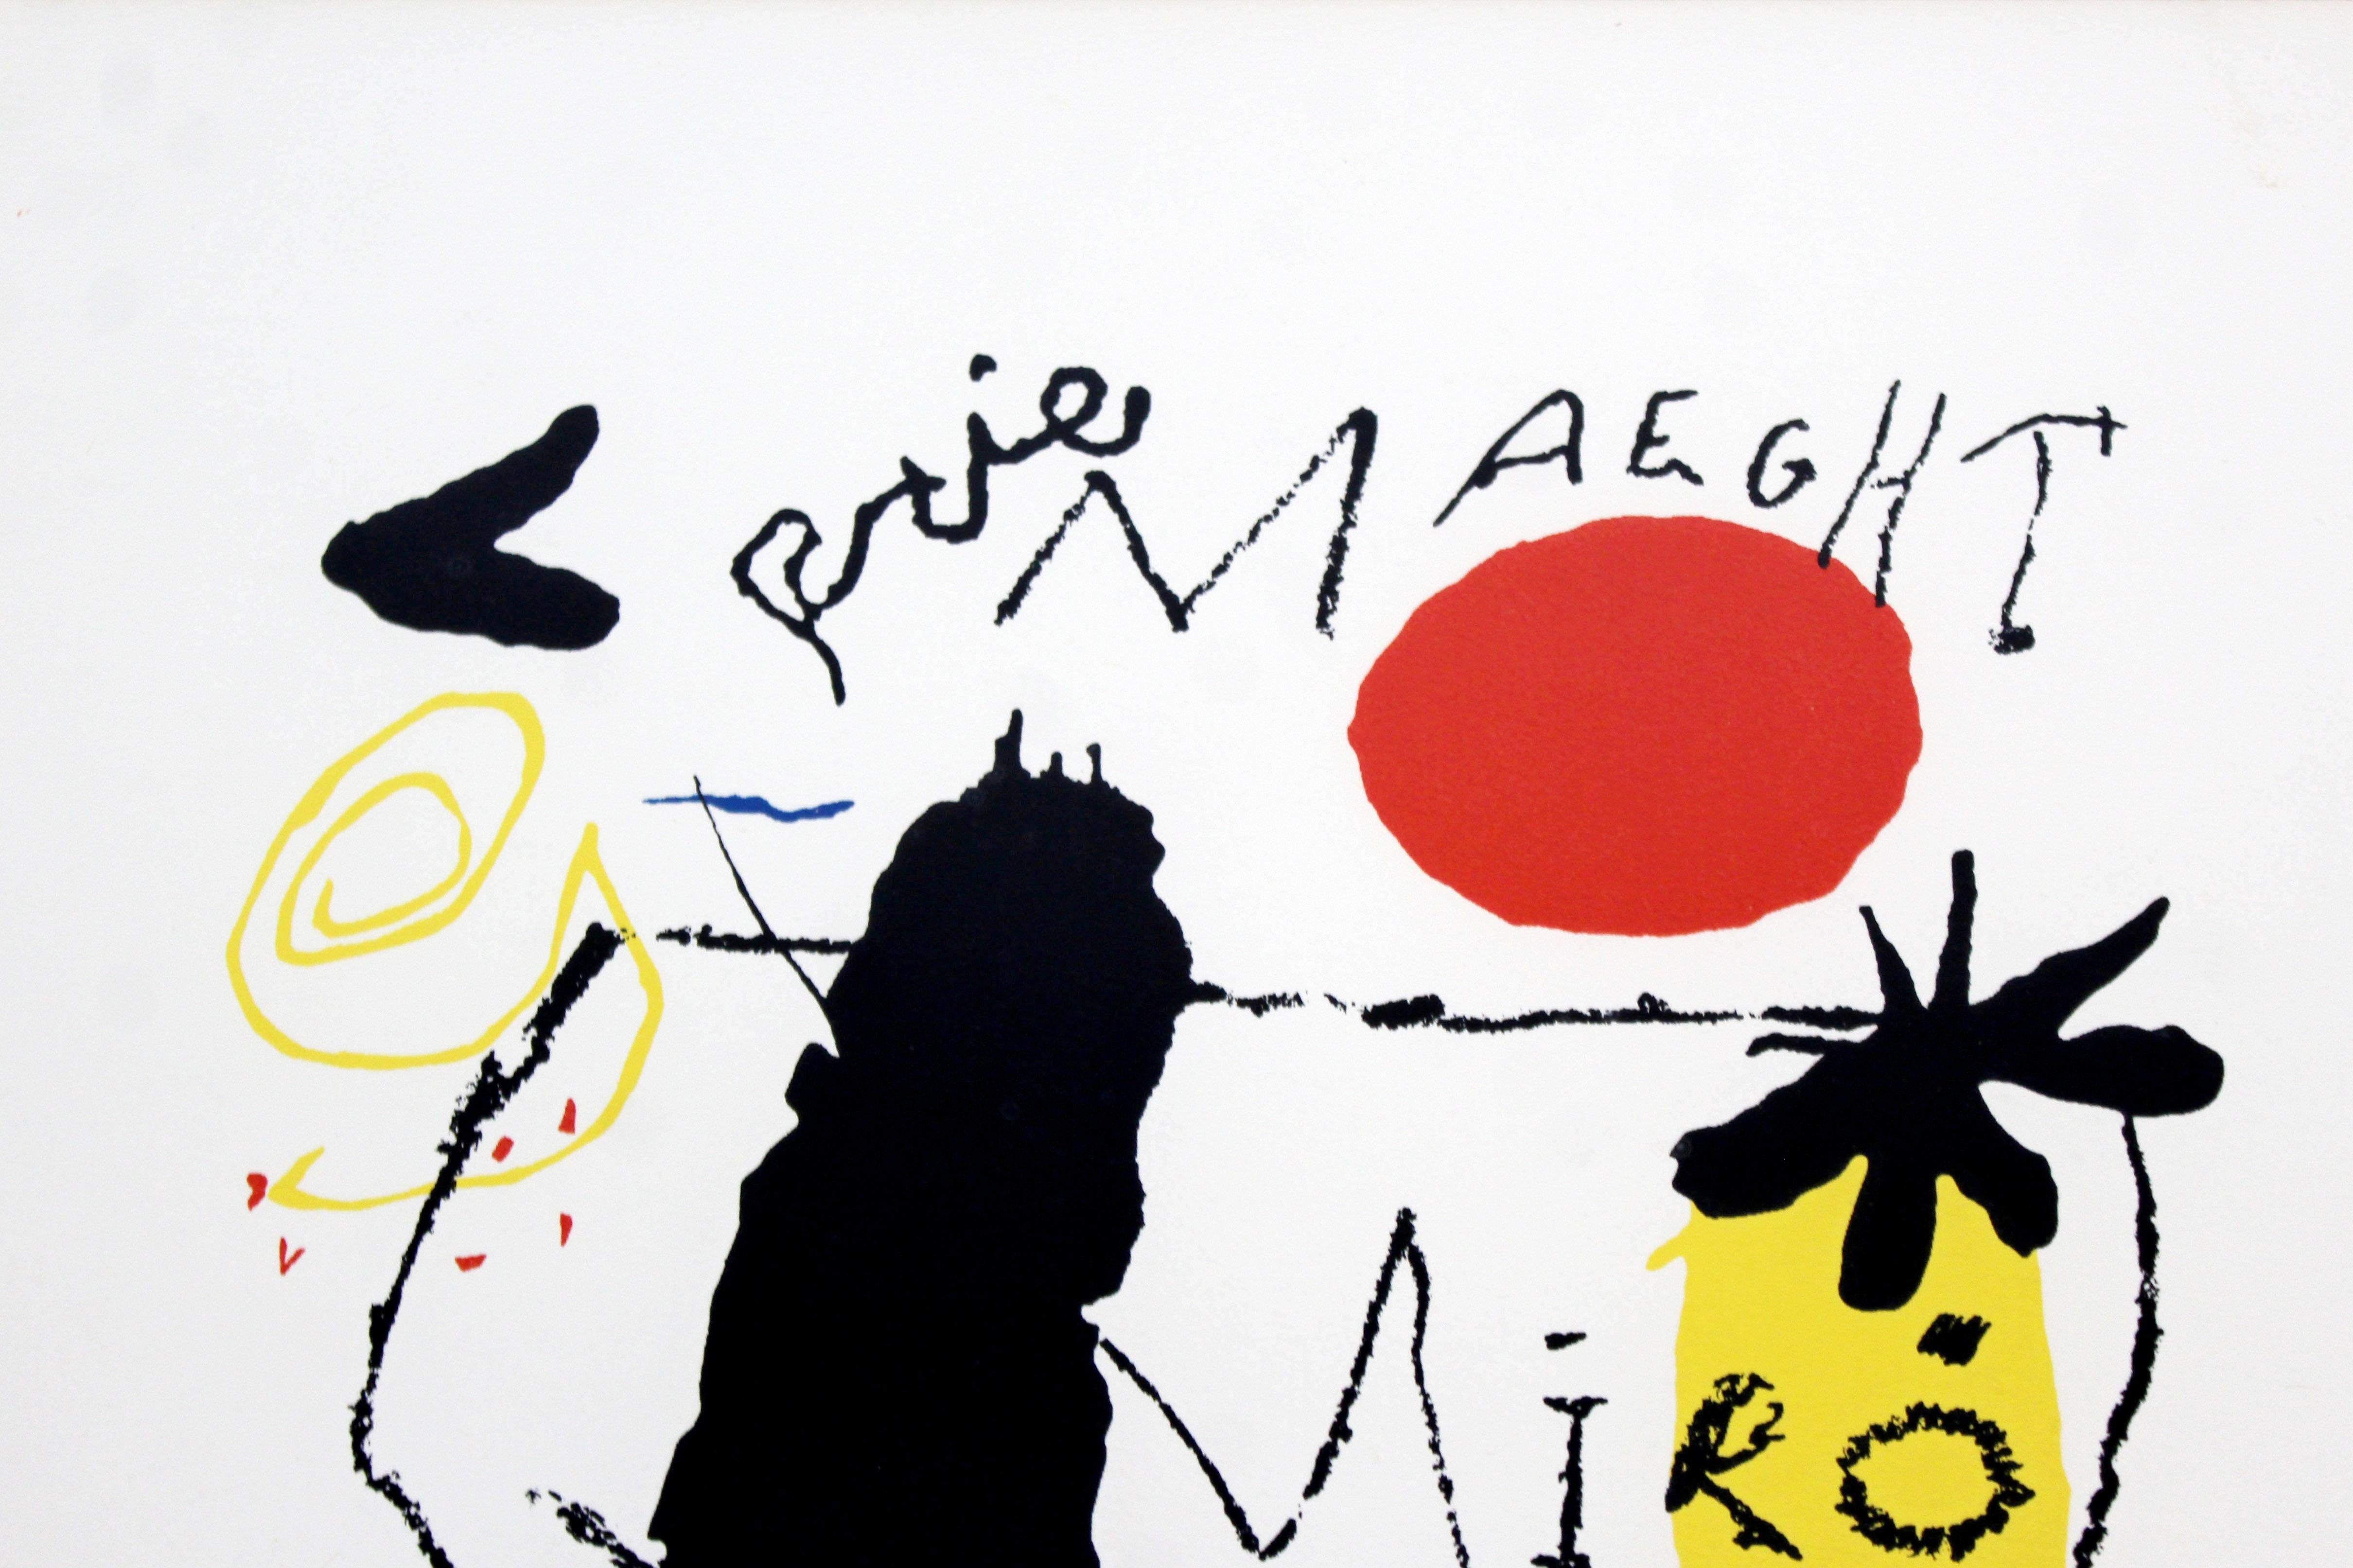 Spanish Contemporary Modern Framed Poster Print Joan Miro Galerie Maeght Graphique 1980s